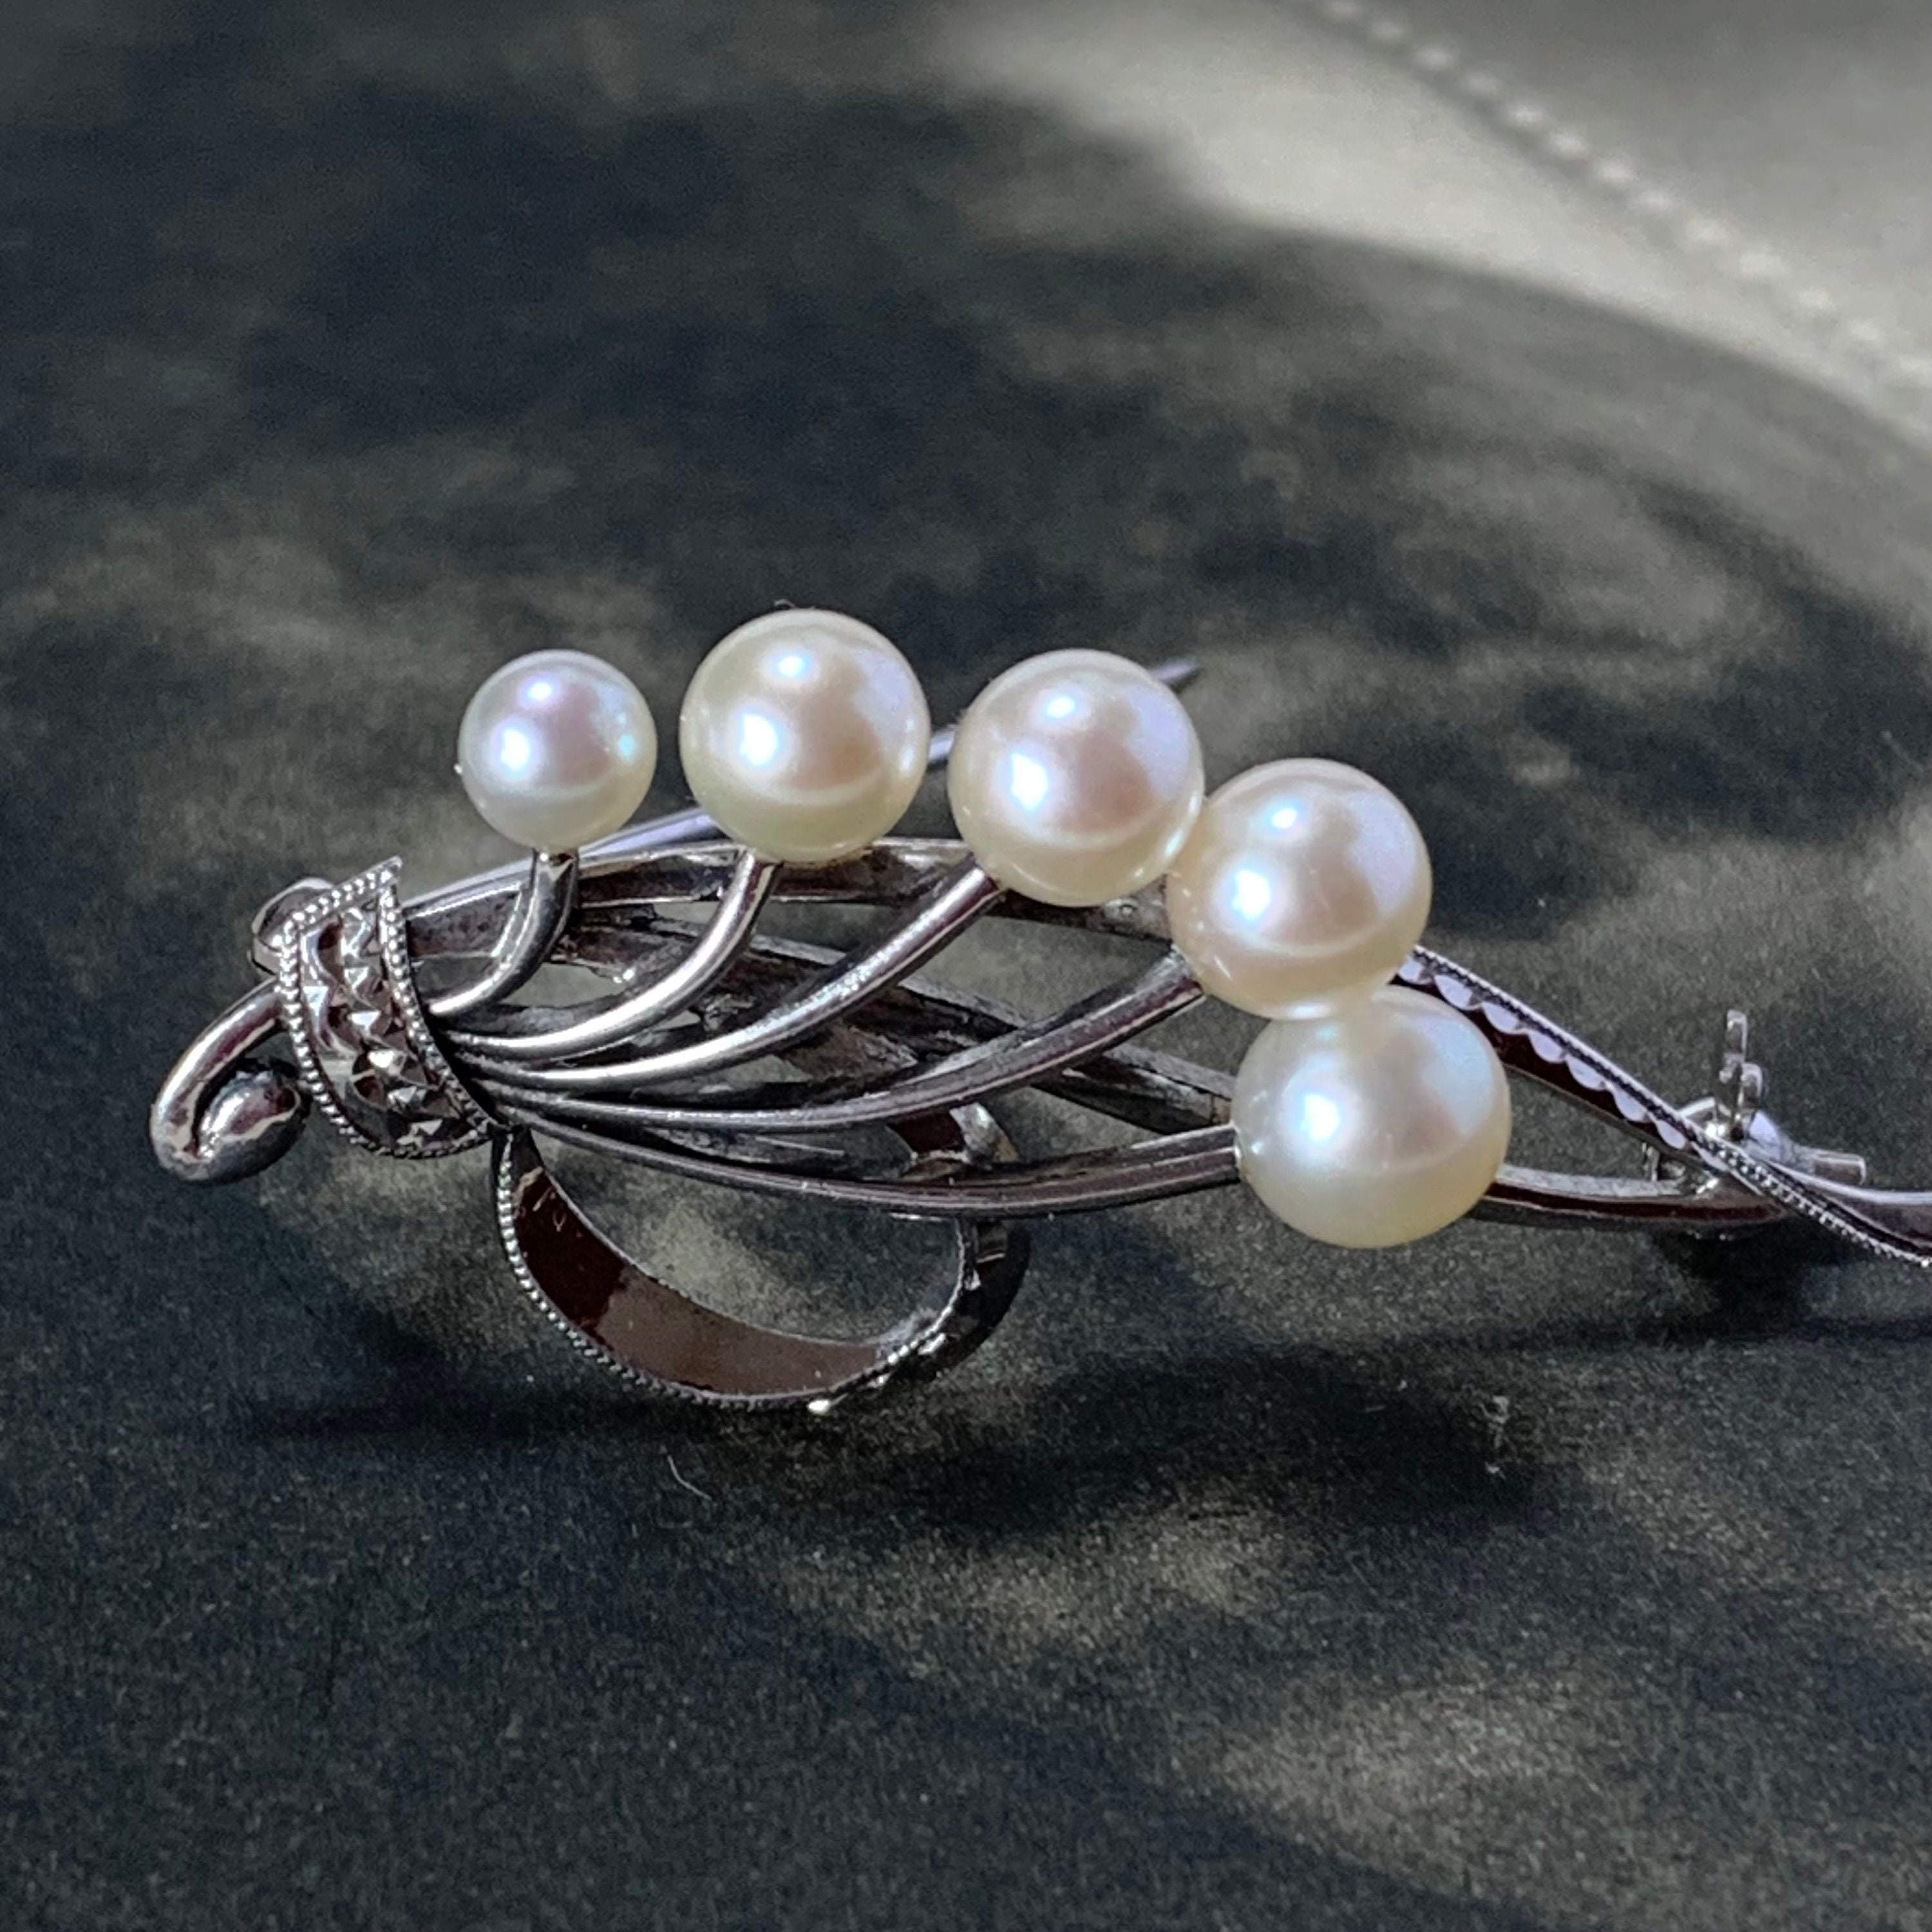 Mikimoto Pearl Brooch. A Vintage Dress Pin Crafted in Silver With 5 Graduating Japanese White Akoya Pearls